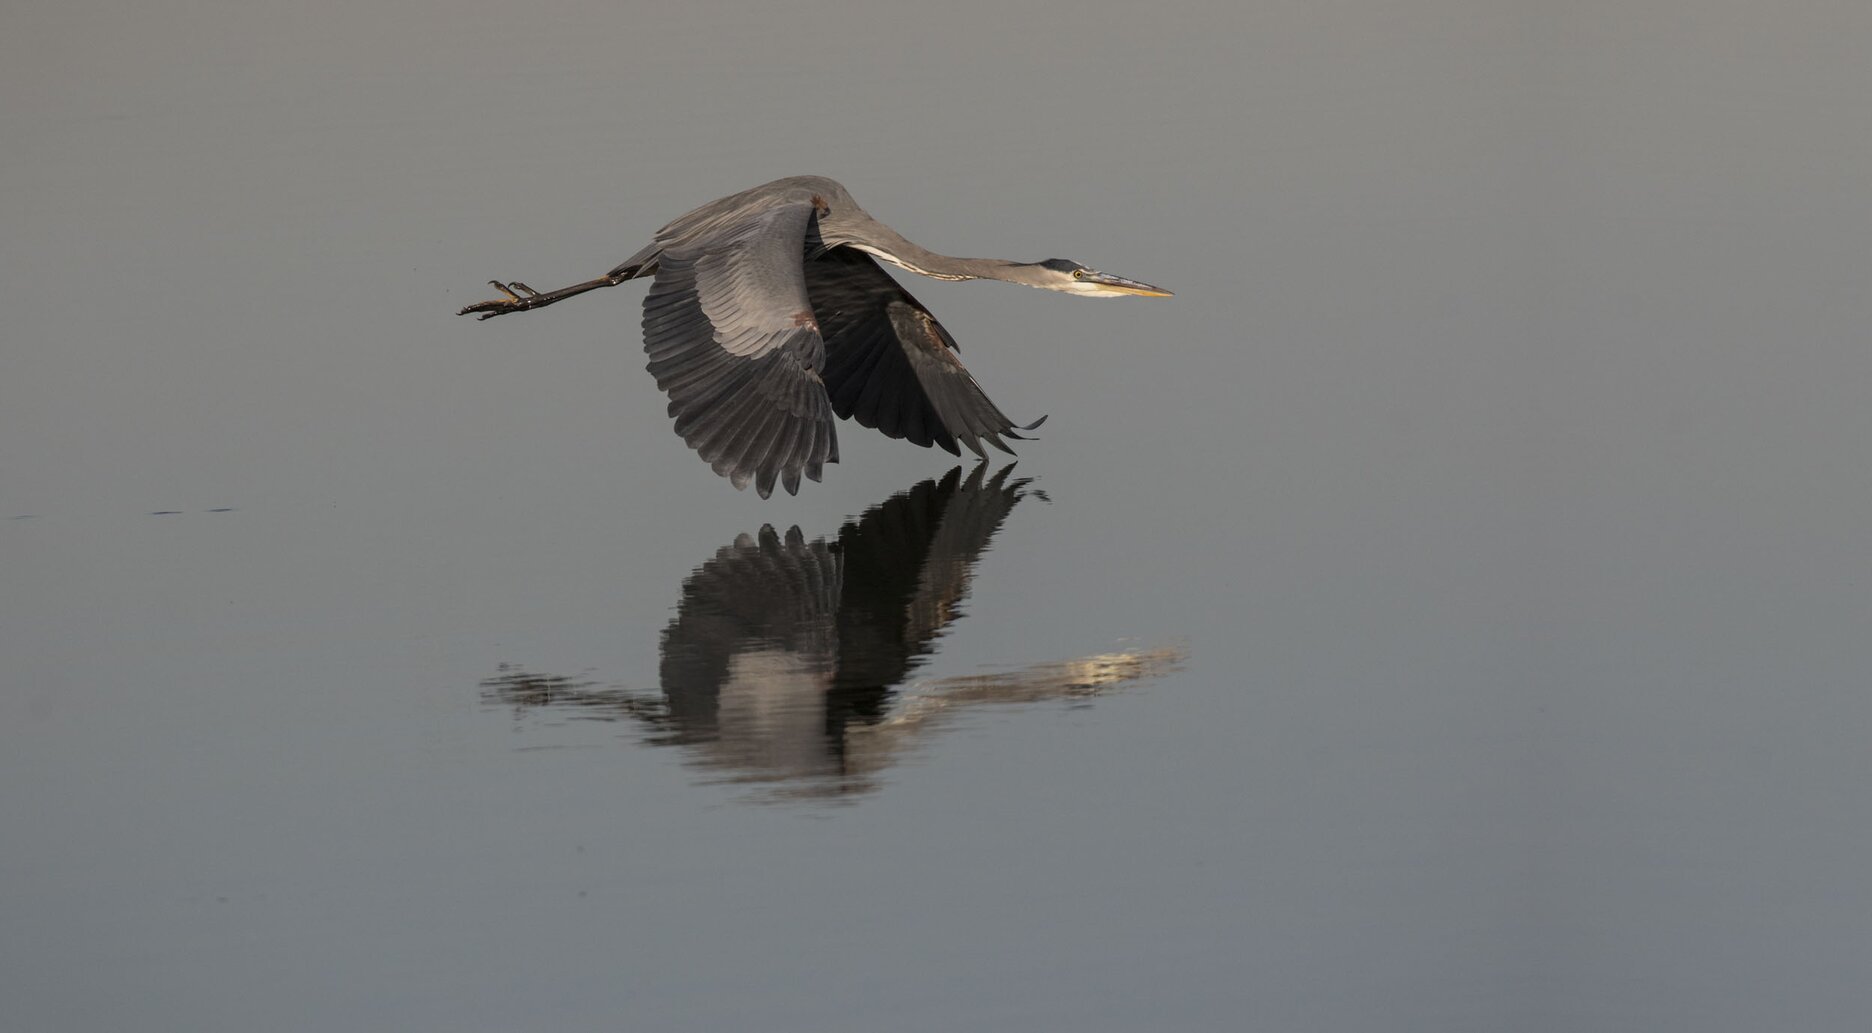 Great Blue Heron often comes to forage in the coves of Inwood Hill Park. Photo: François Portmann